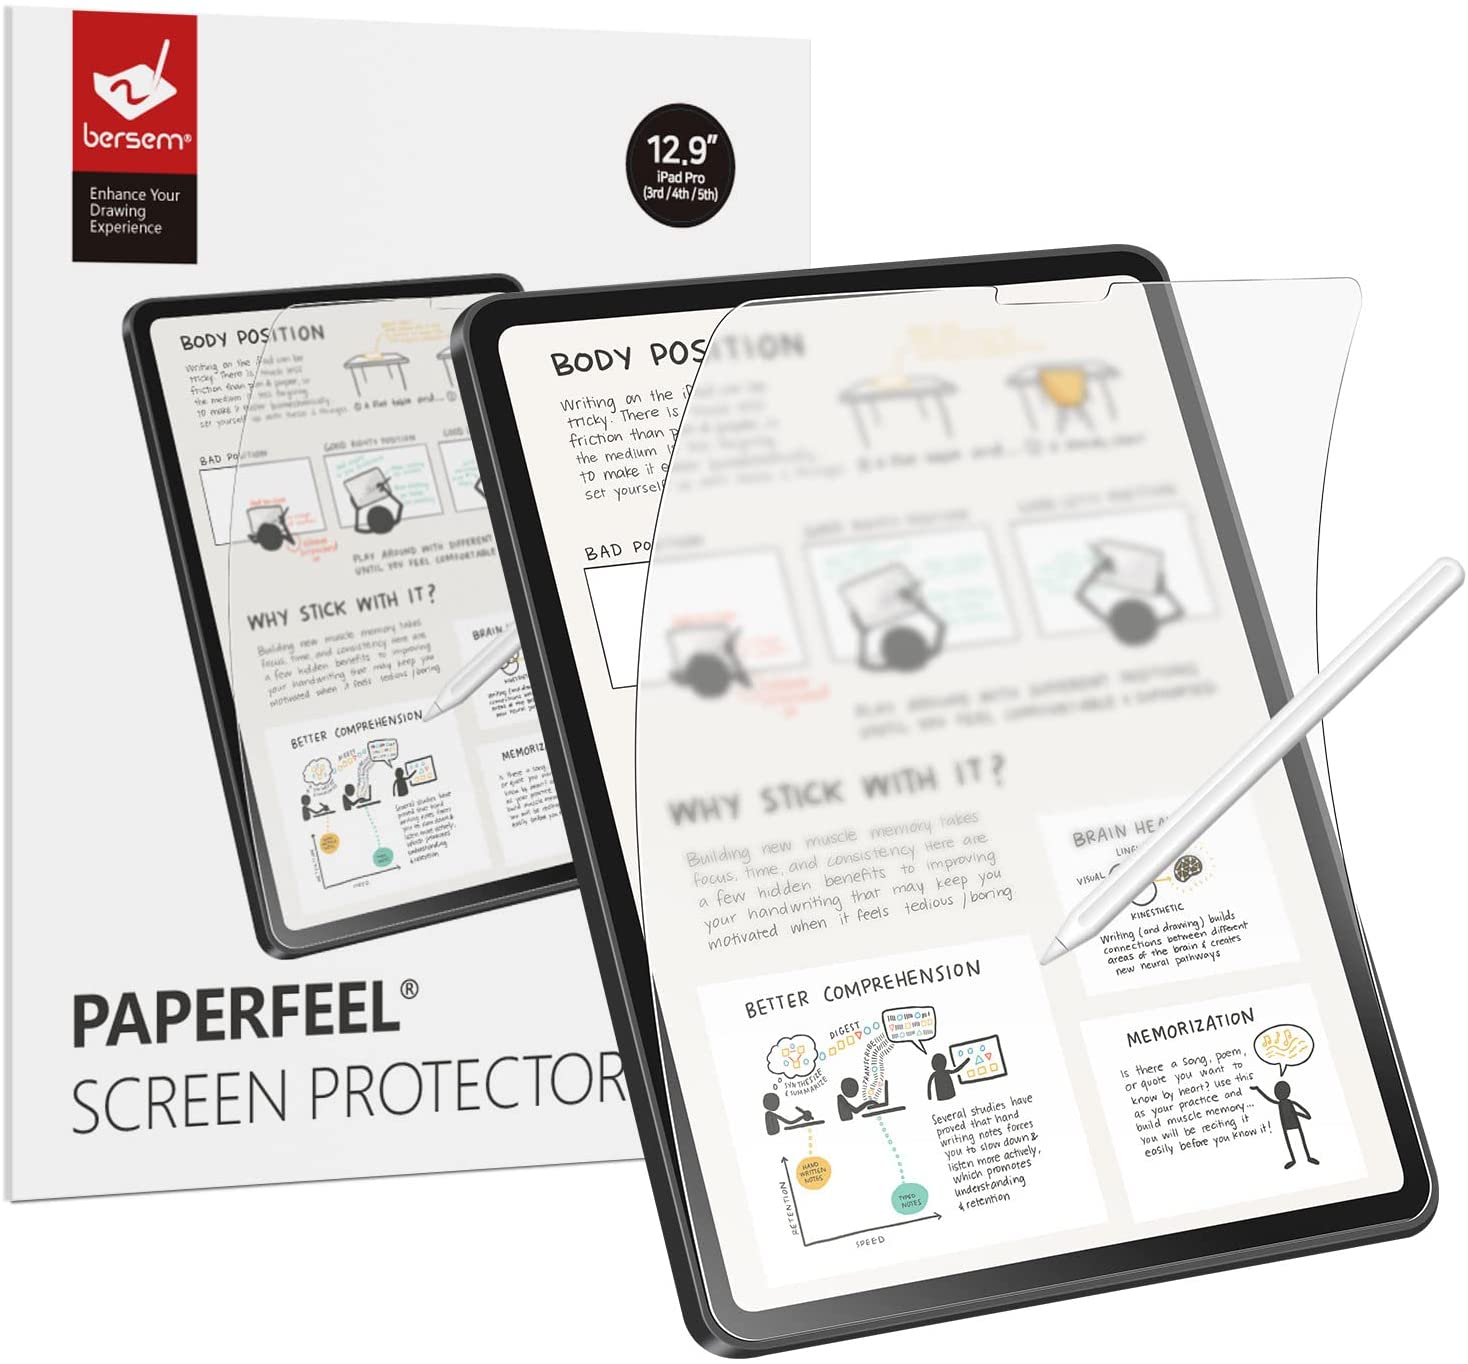 Paperfeel screen protector CM deal